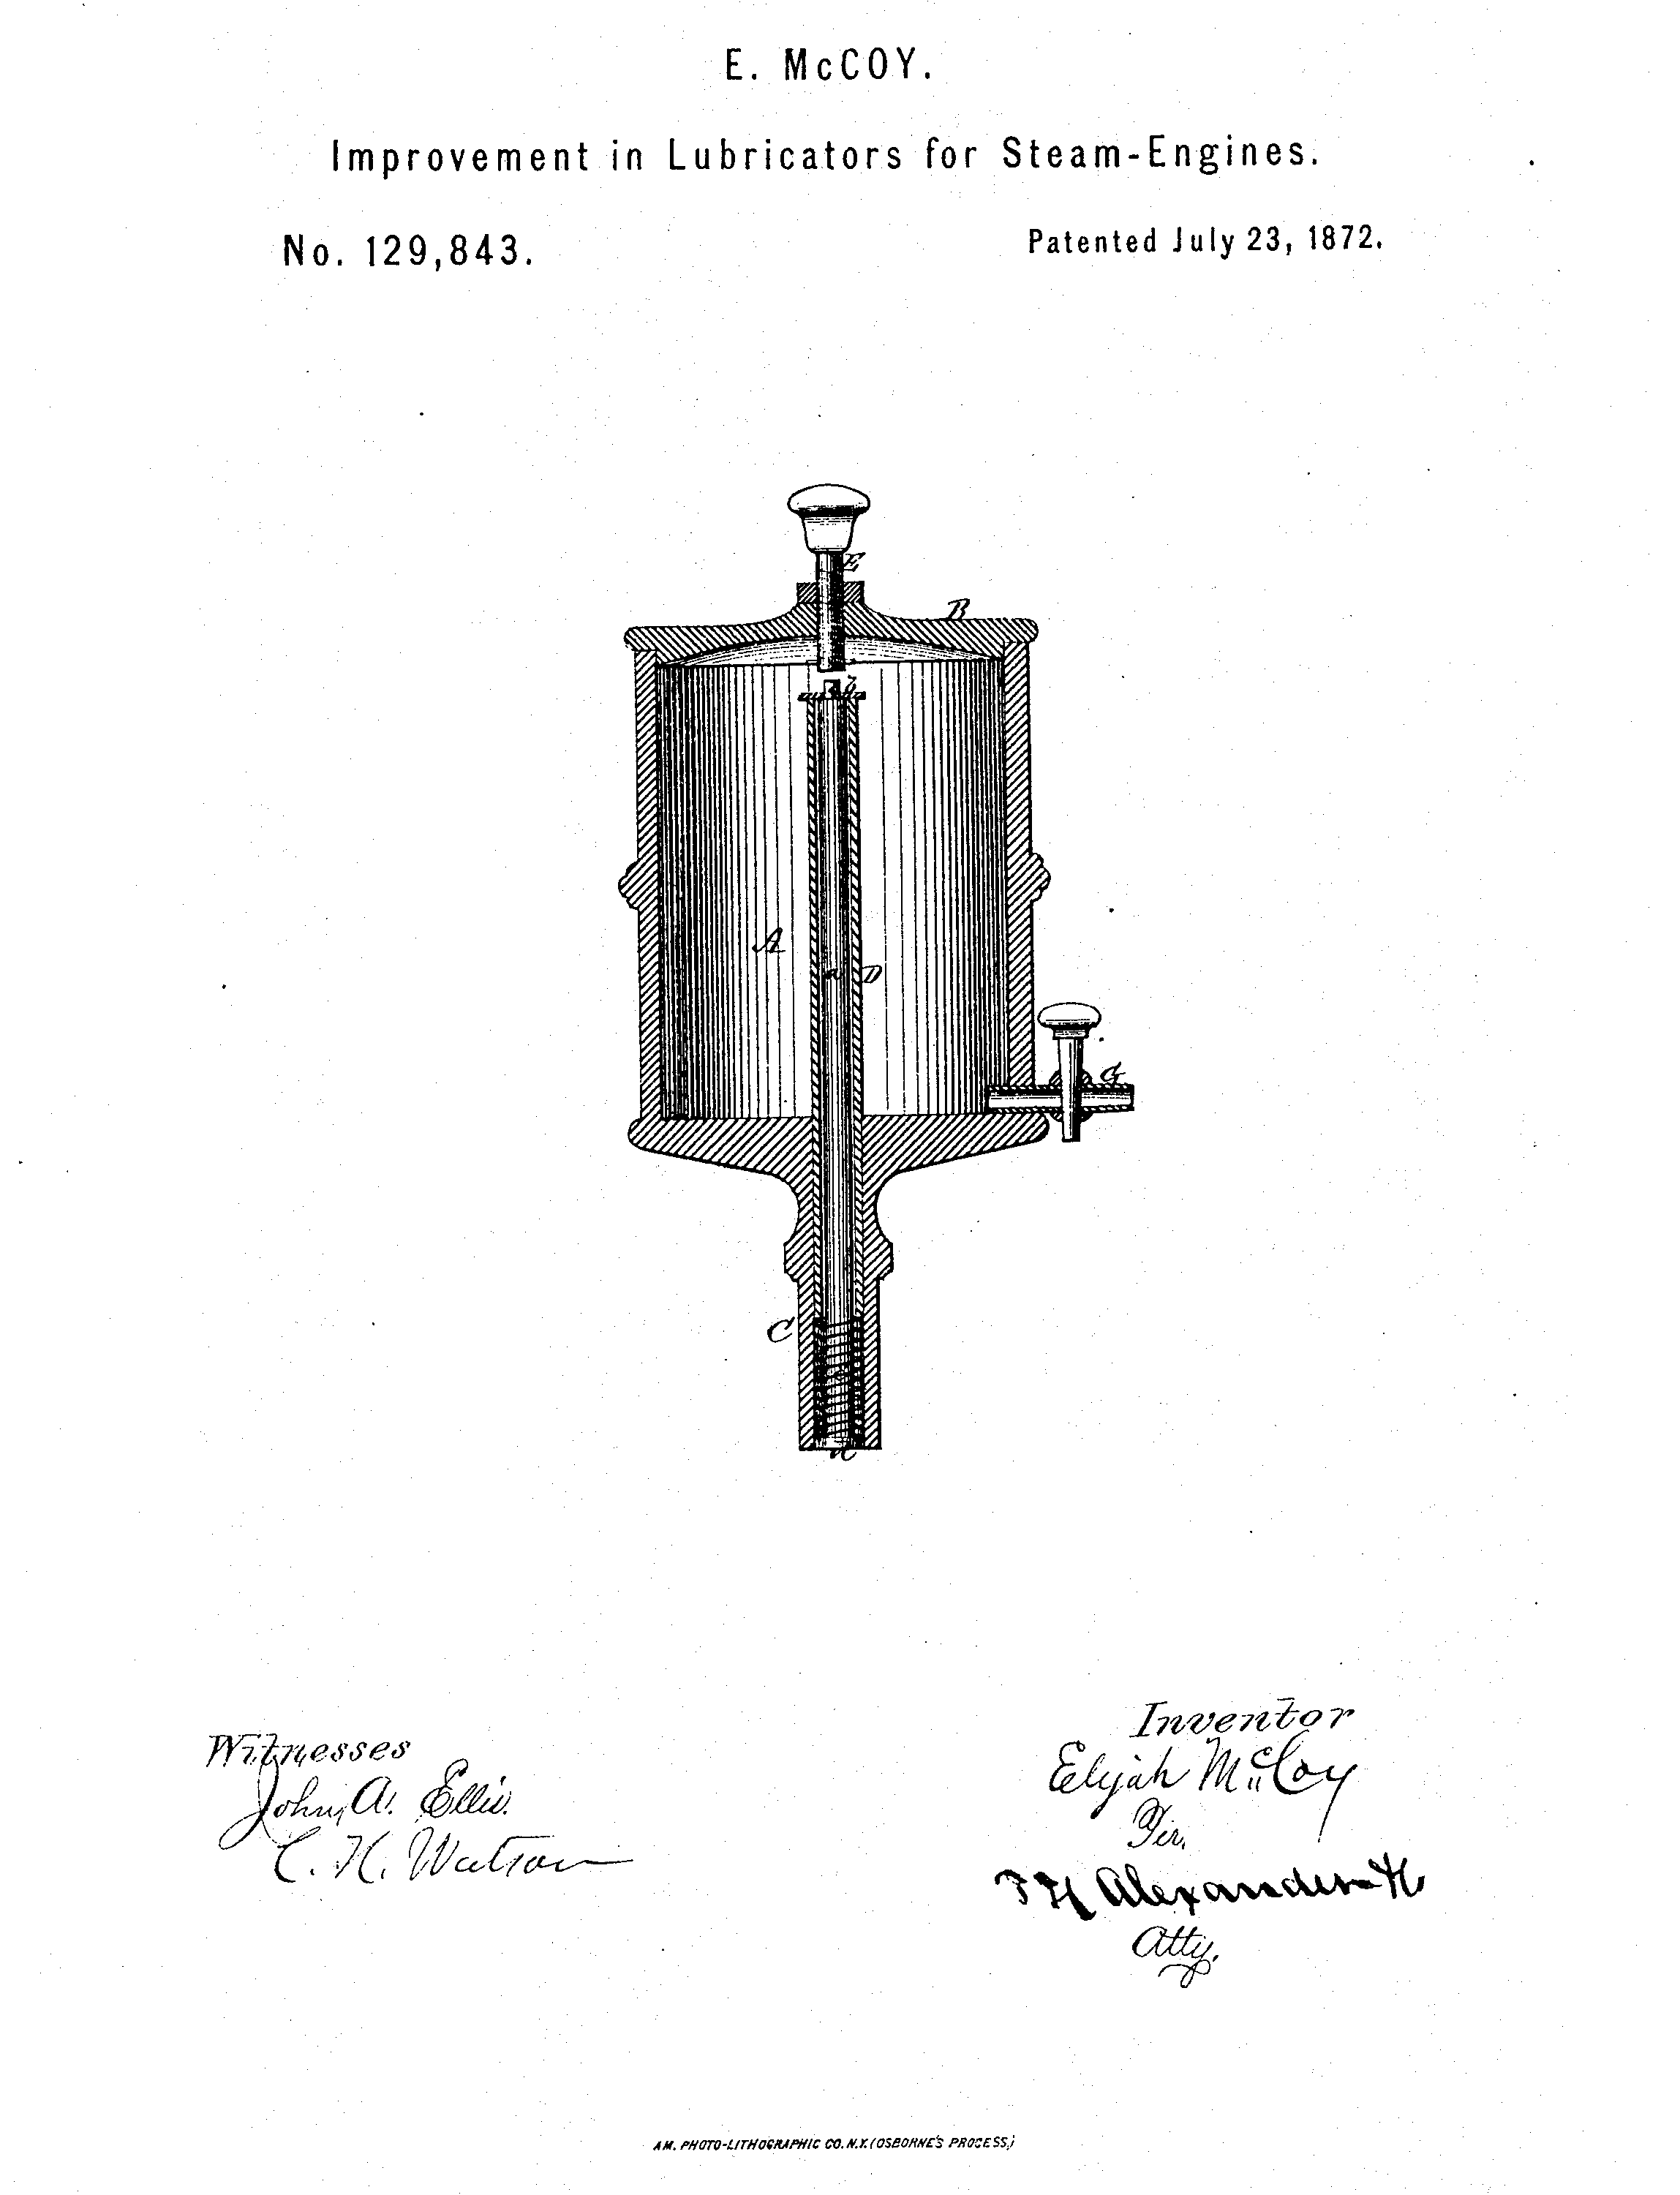 A black-and-white illustration of Elijah McCoy's automatic lubricator for engines.